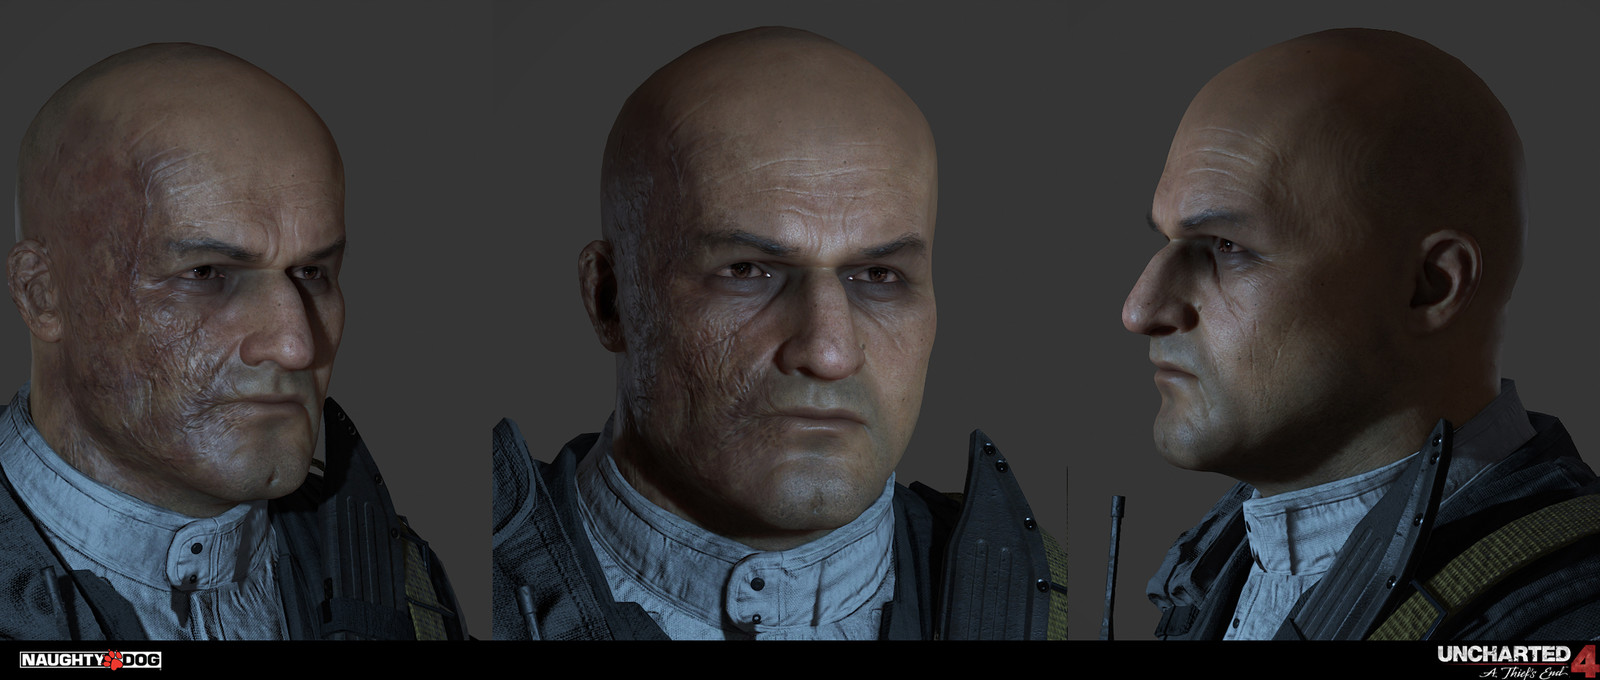 Lazarevic for U4 - head from scratch - some of the clothing re-used from uncharted 2 - re-textured and materials.